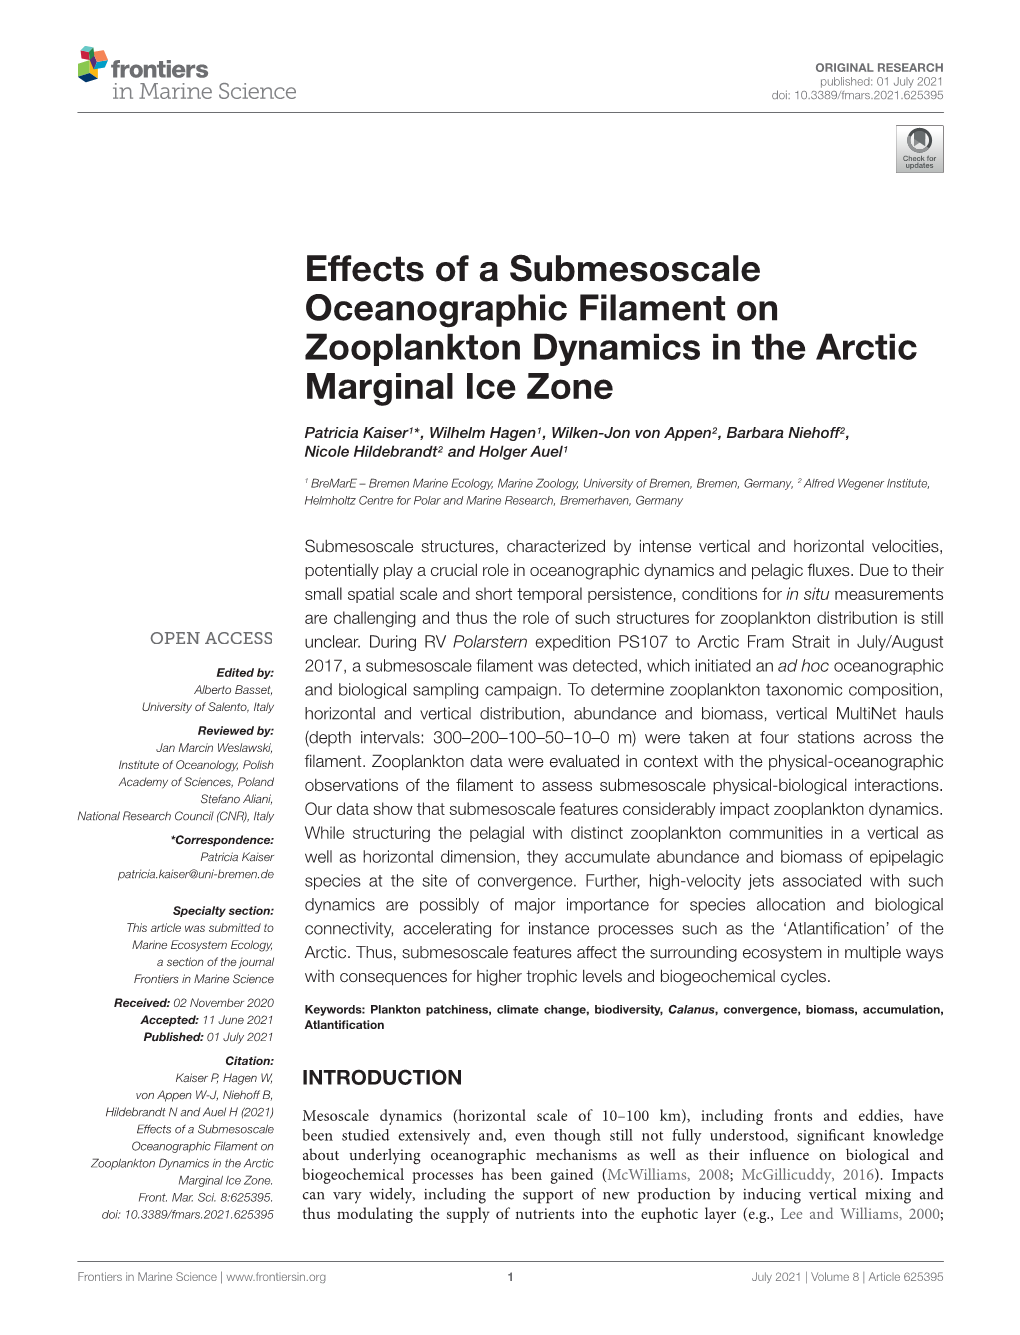 Effects of a Submesoscale Oceanographic Filament on Zooplankton Dynamics in the Arctic Marginal Ice Zone